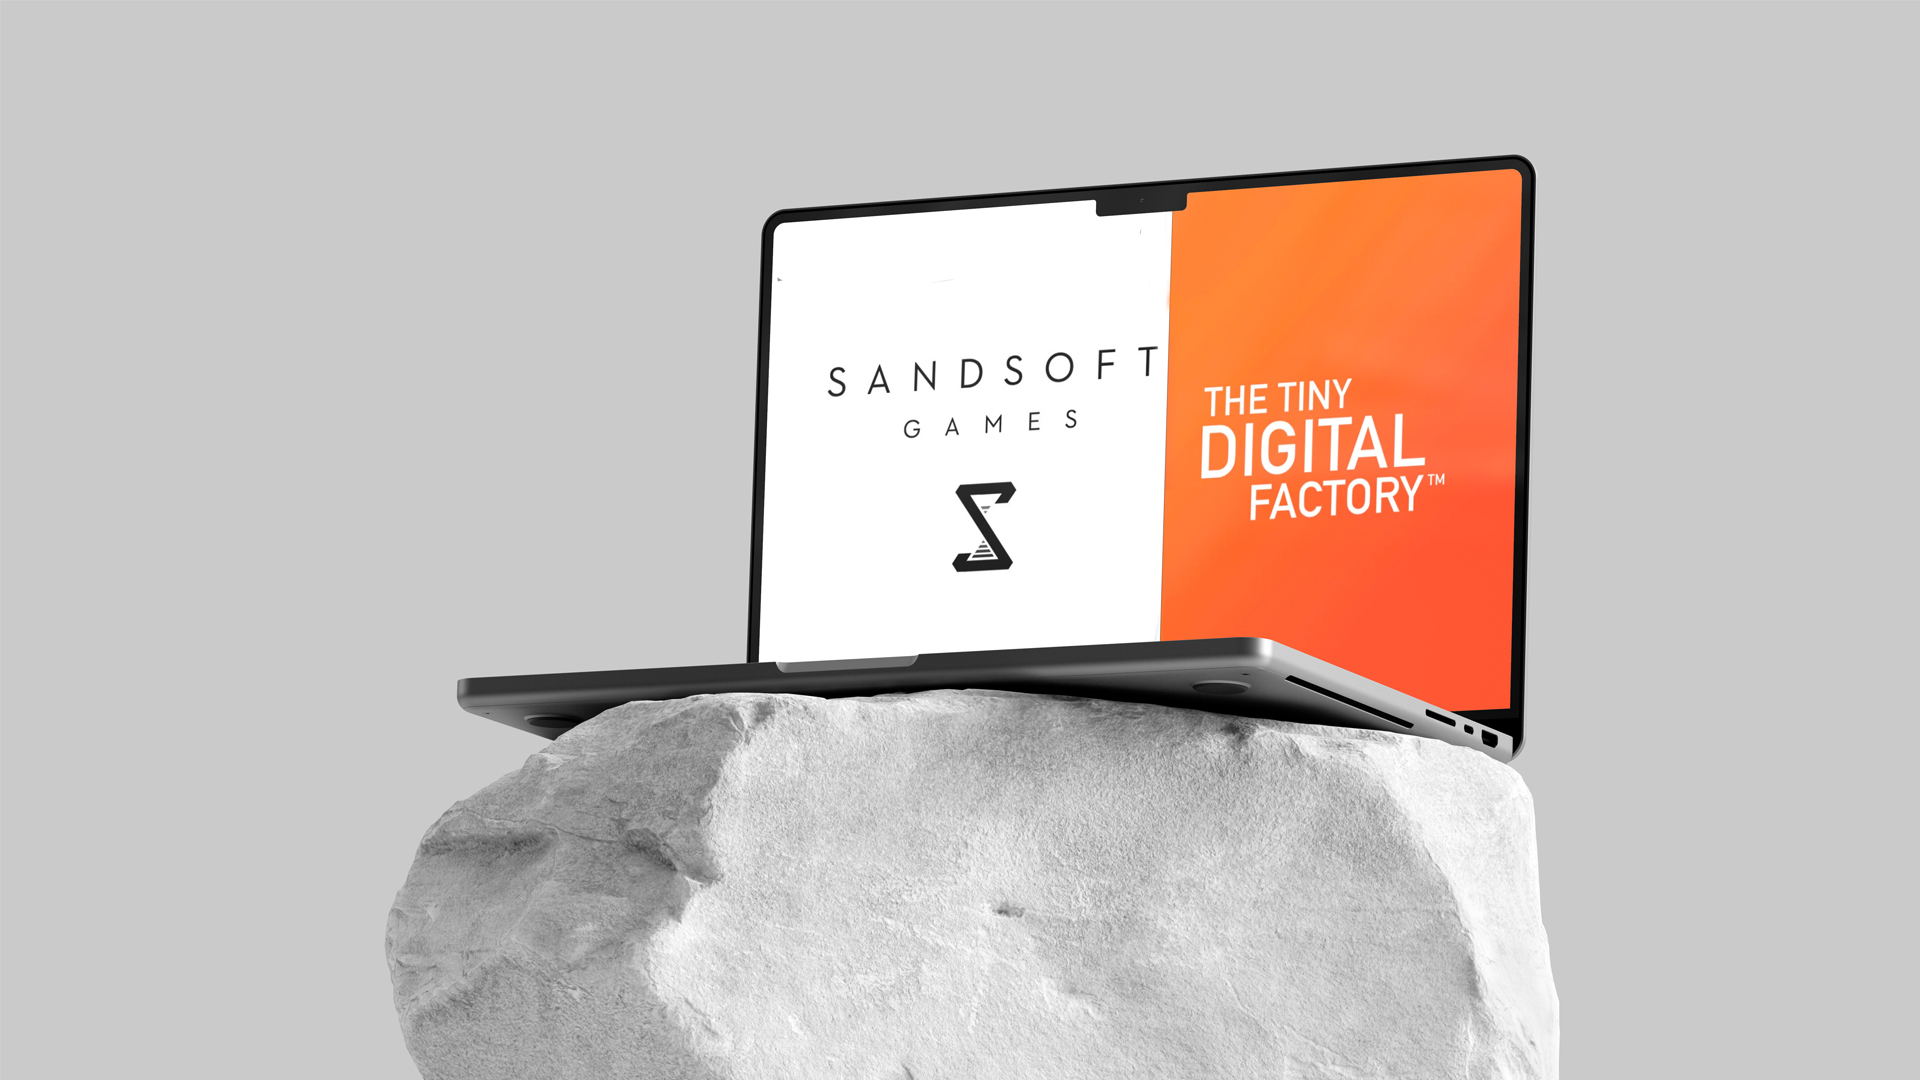 Sandsoft Games invests $3.25 million in The Tiny Digital Factory